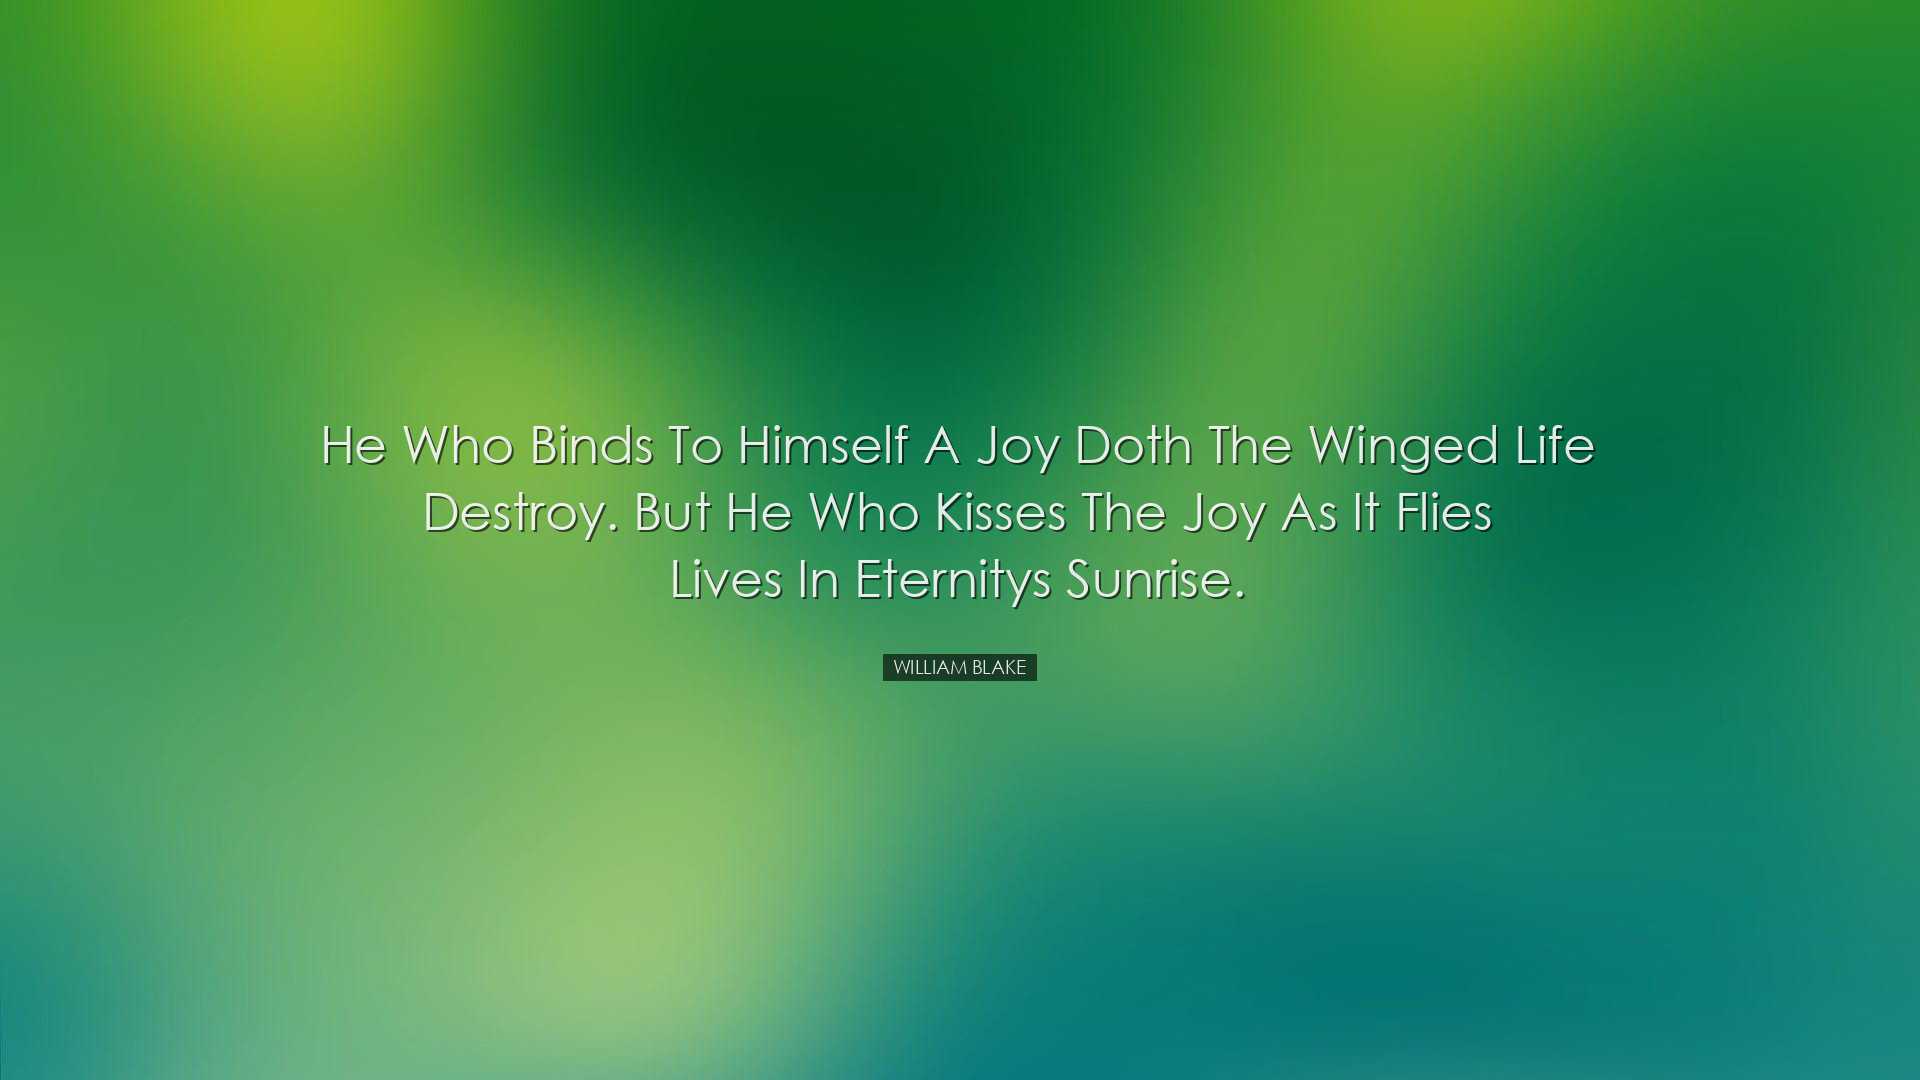 He who binds to himself a joy doth the winged life destroy. But he